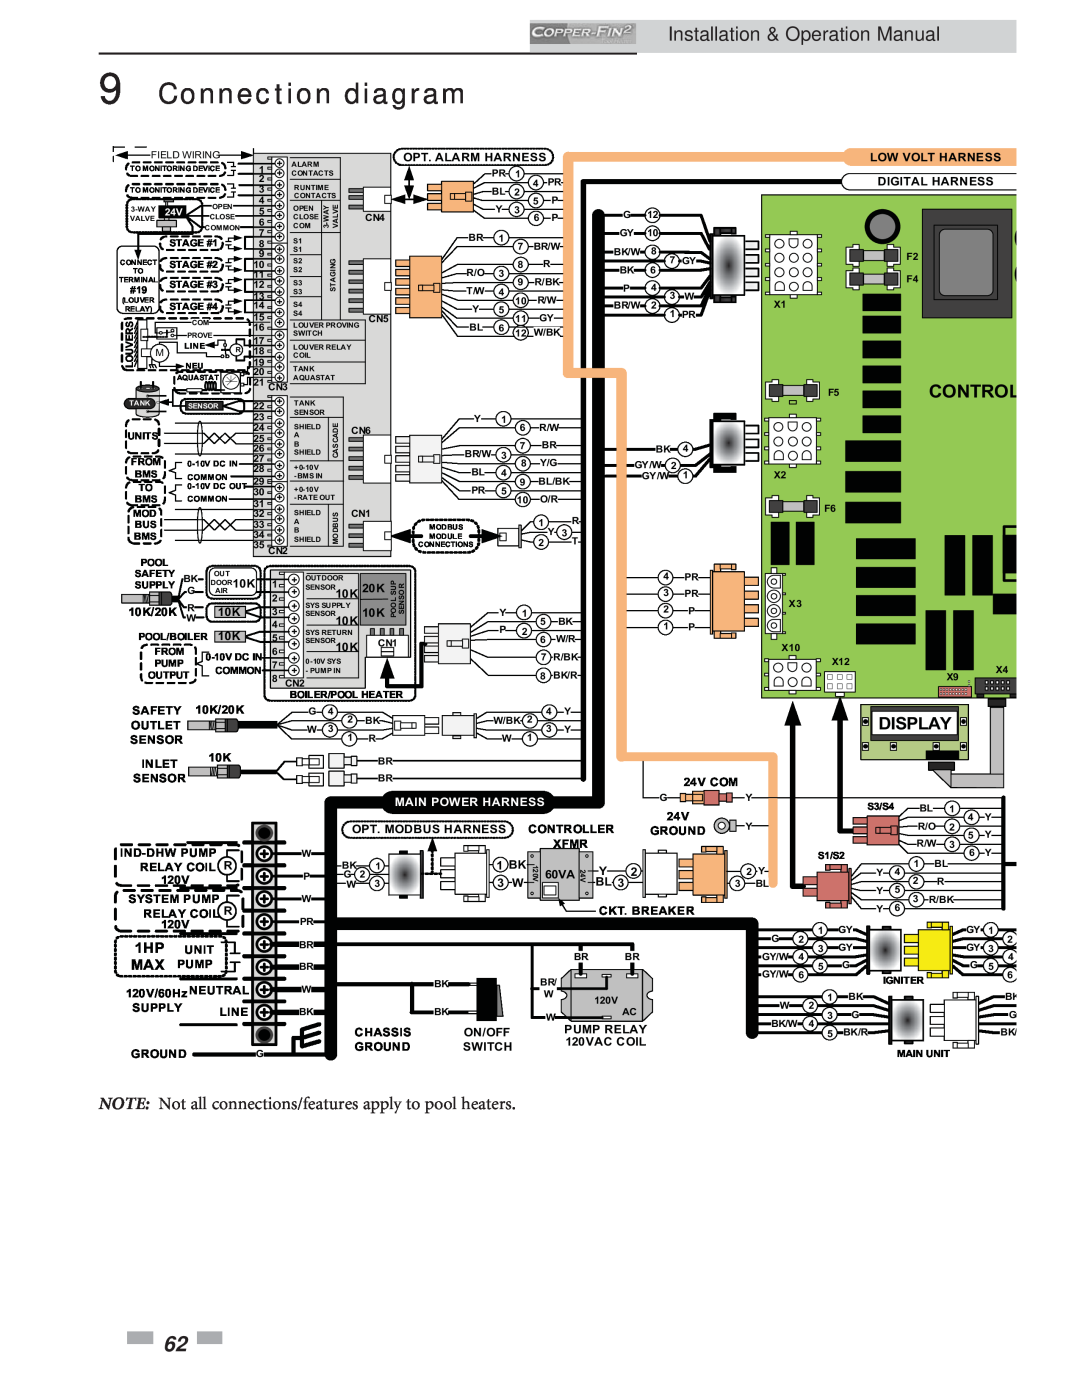 Lochinvar 502, 2072 operation manual Connection diagram, Installation & Operation Manual, Display, Main Power Harness 